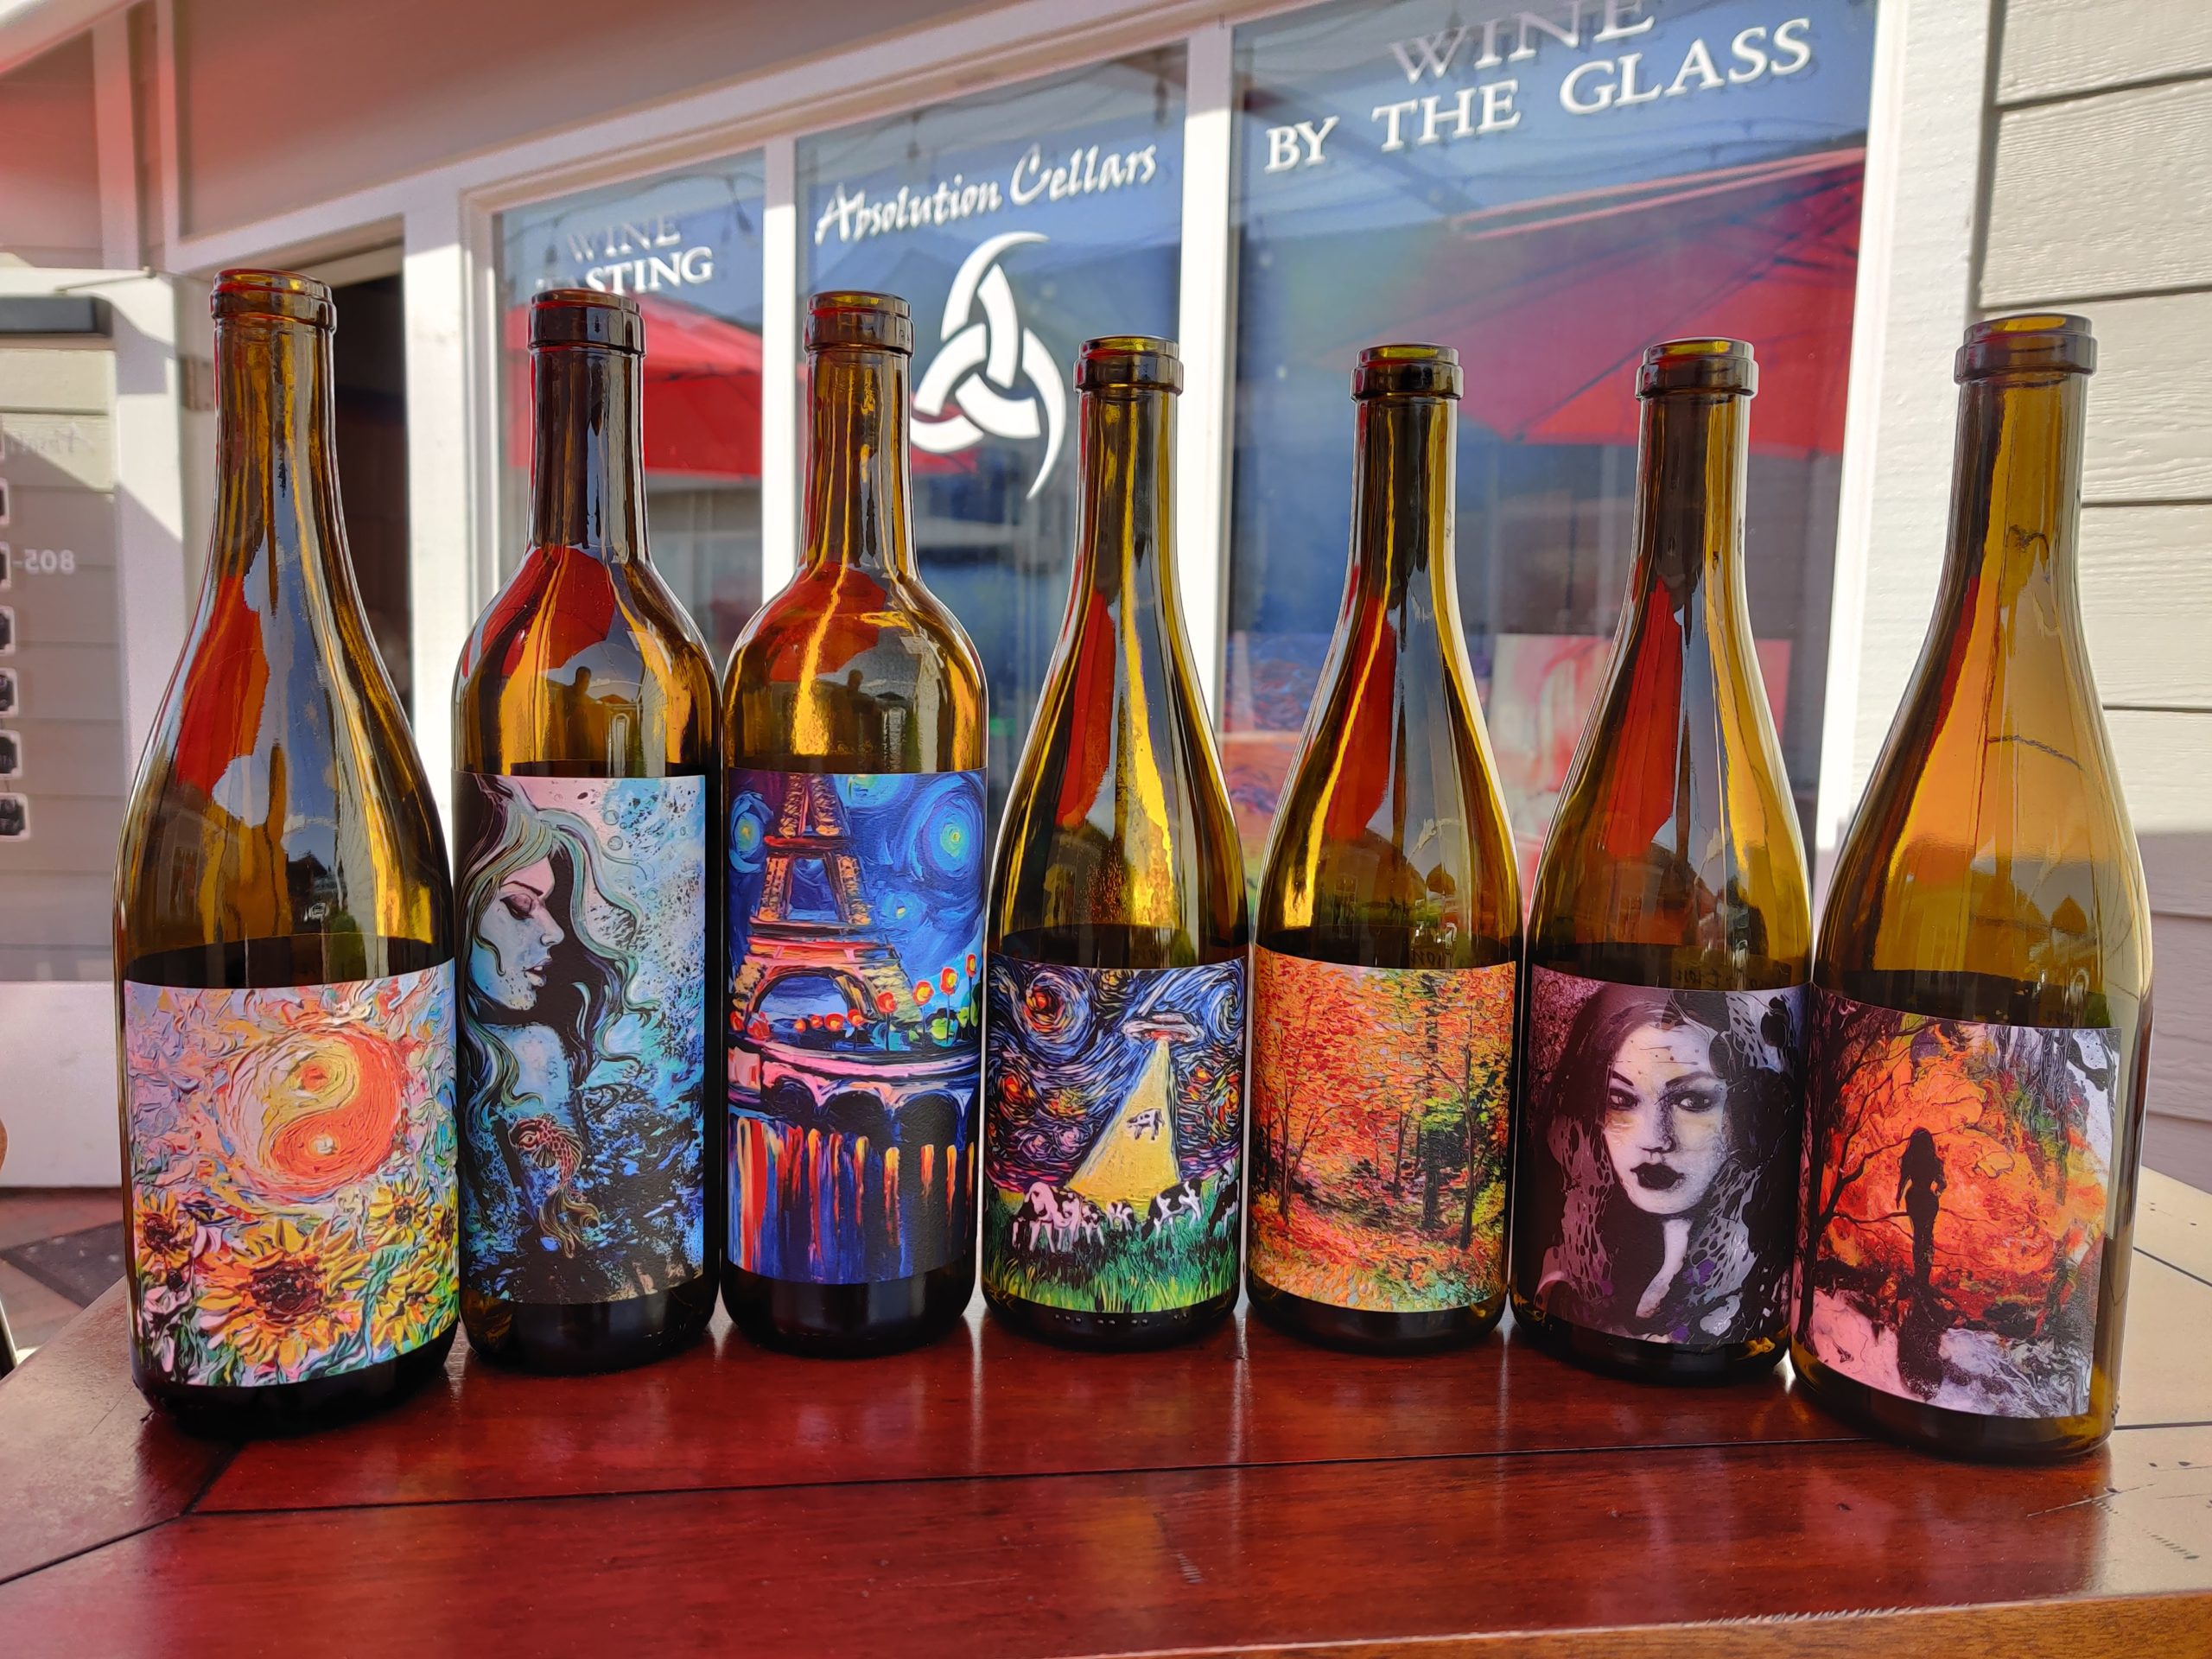 https://www.absolutioncellars.com/wp-content/uploads/2021/07/tasting-room-with-bottles-scaled.jpg